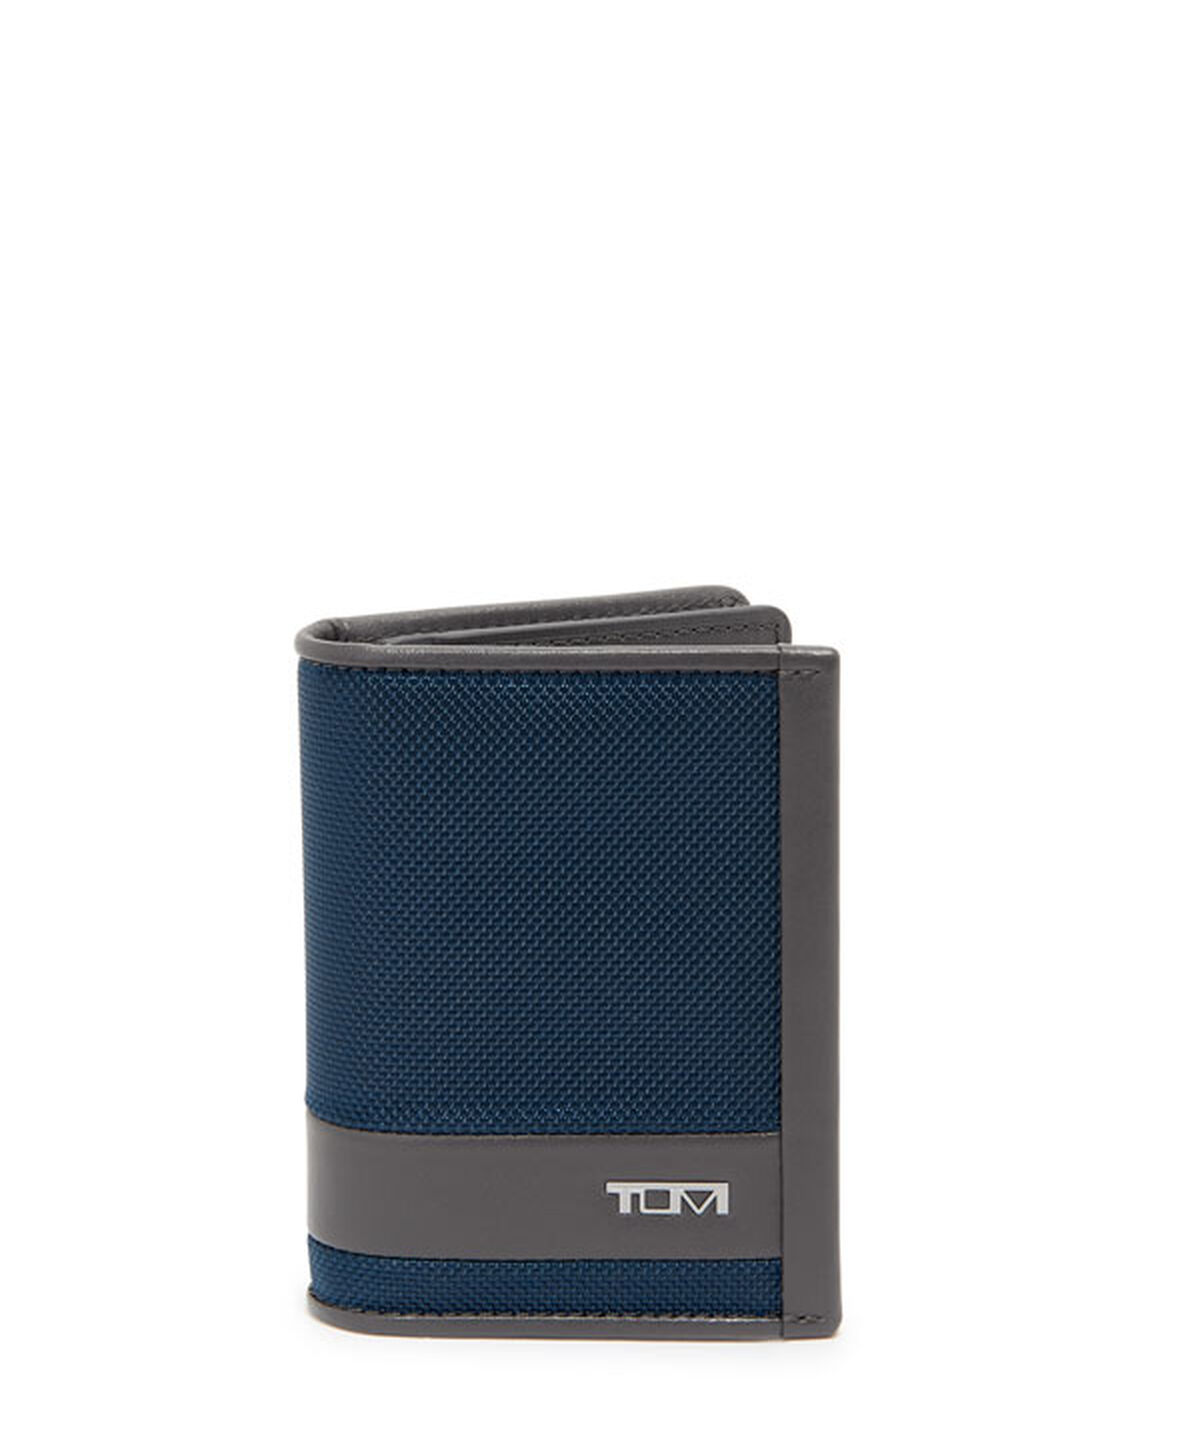 Tumi Alpha GUSSETED CARD CASE  Navy/Grey